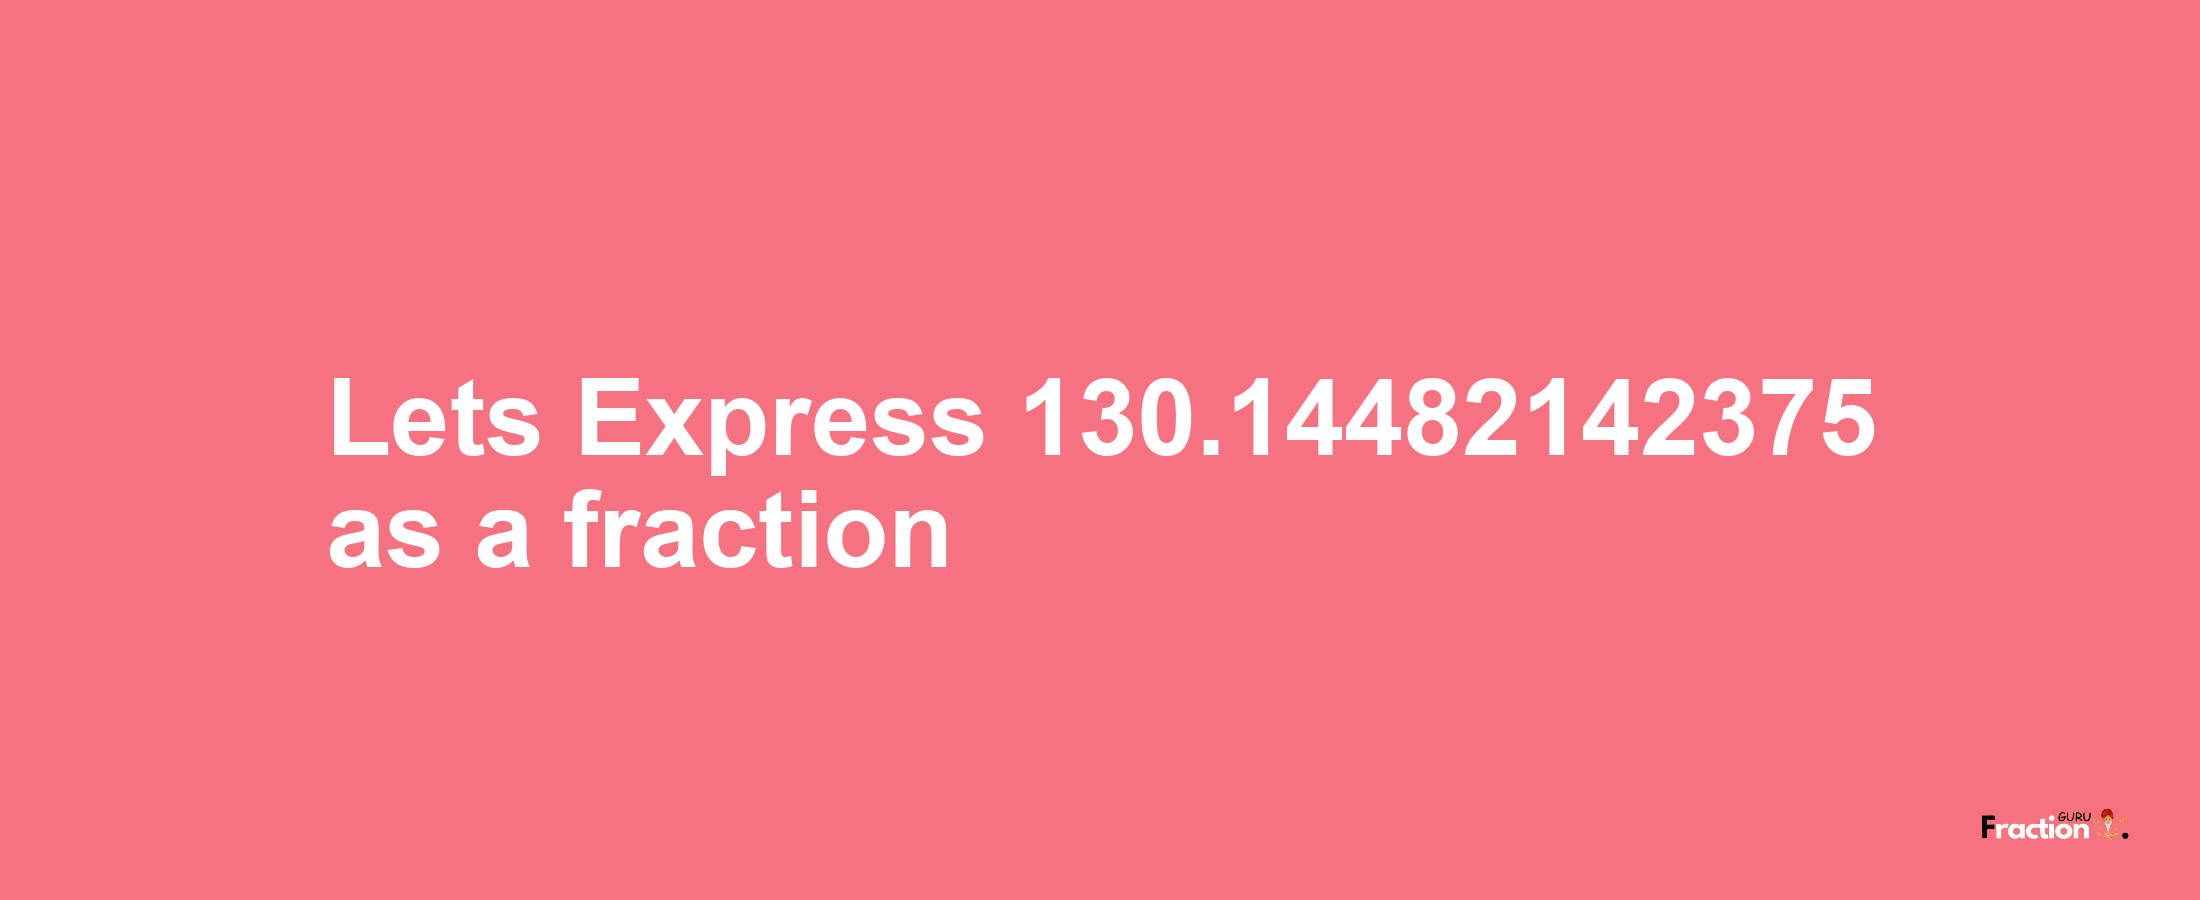 Lets Express 130.14482142375 as afraction